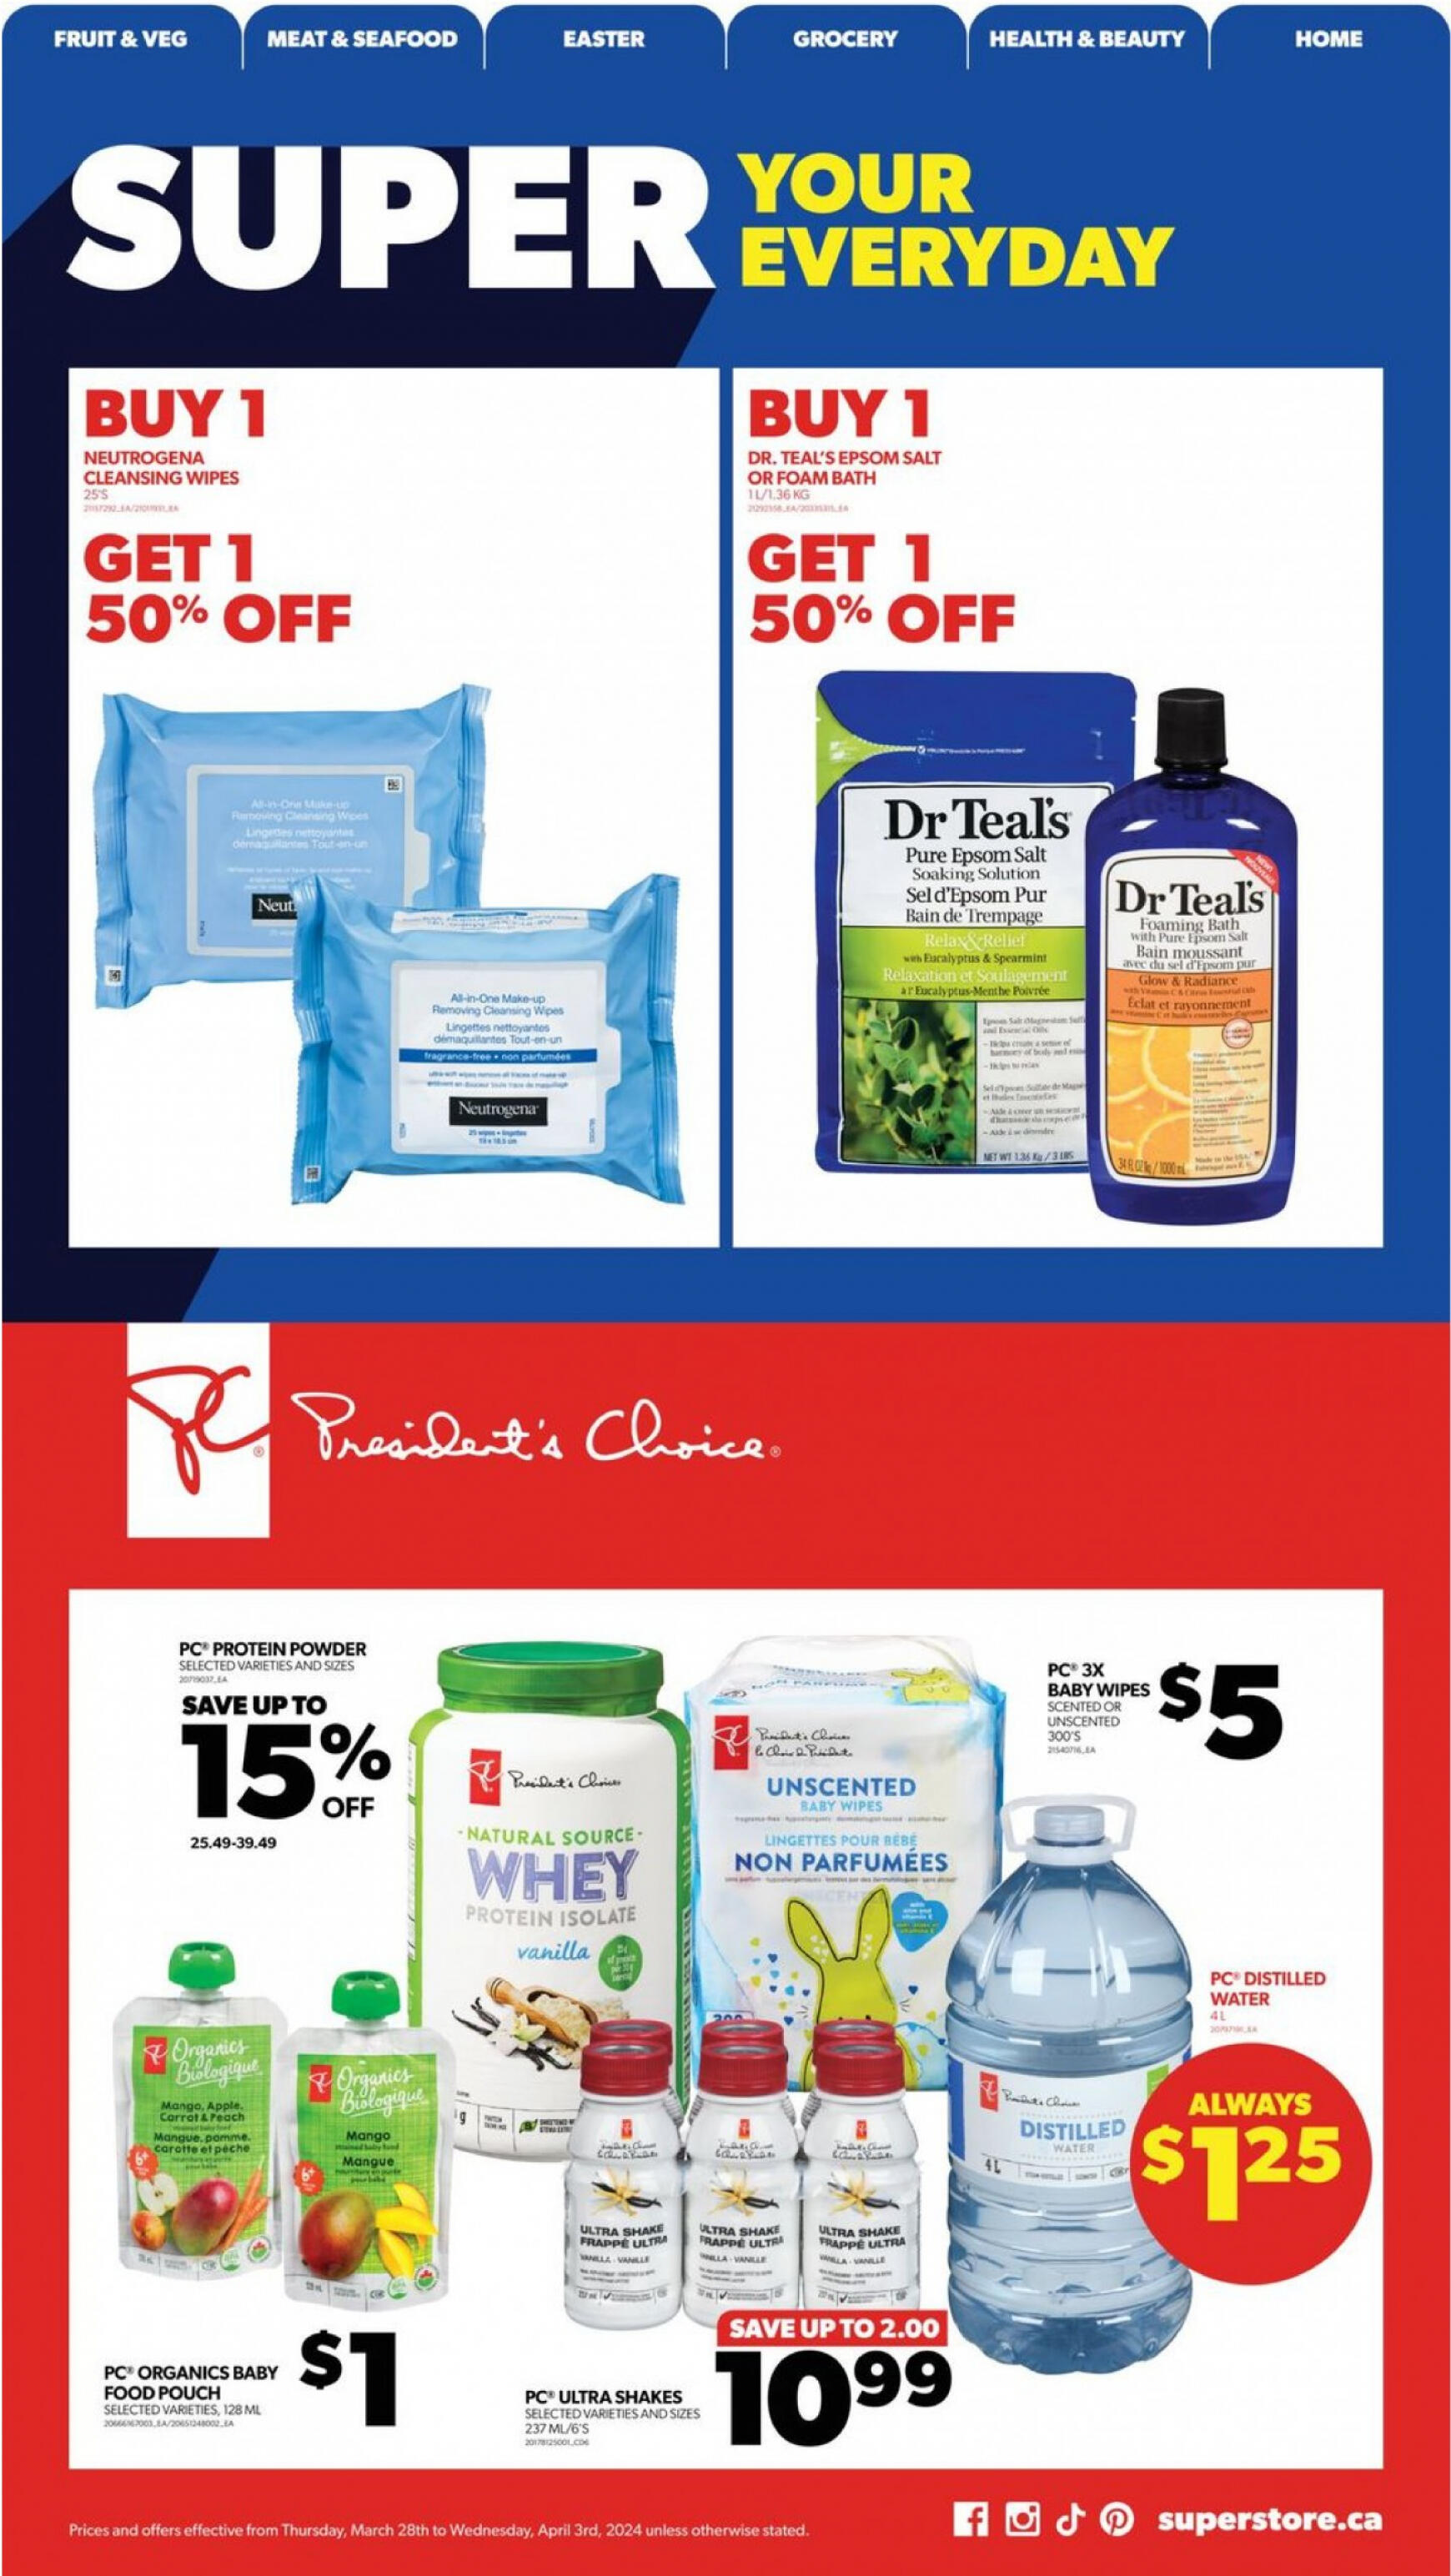 real-canadian-superstore - Real Canadian Superstore flyer current 28.03. - 03.04. - page: 27